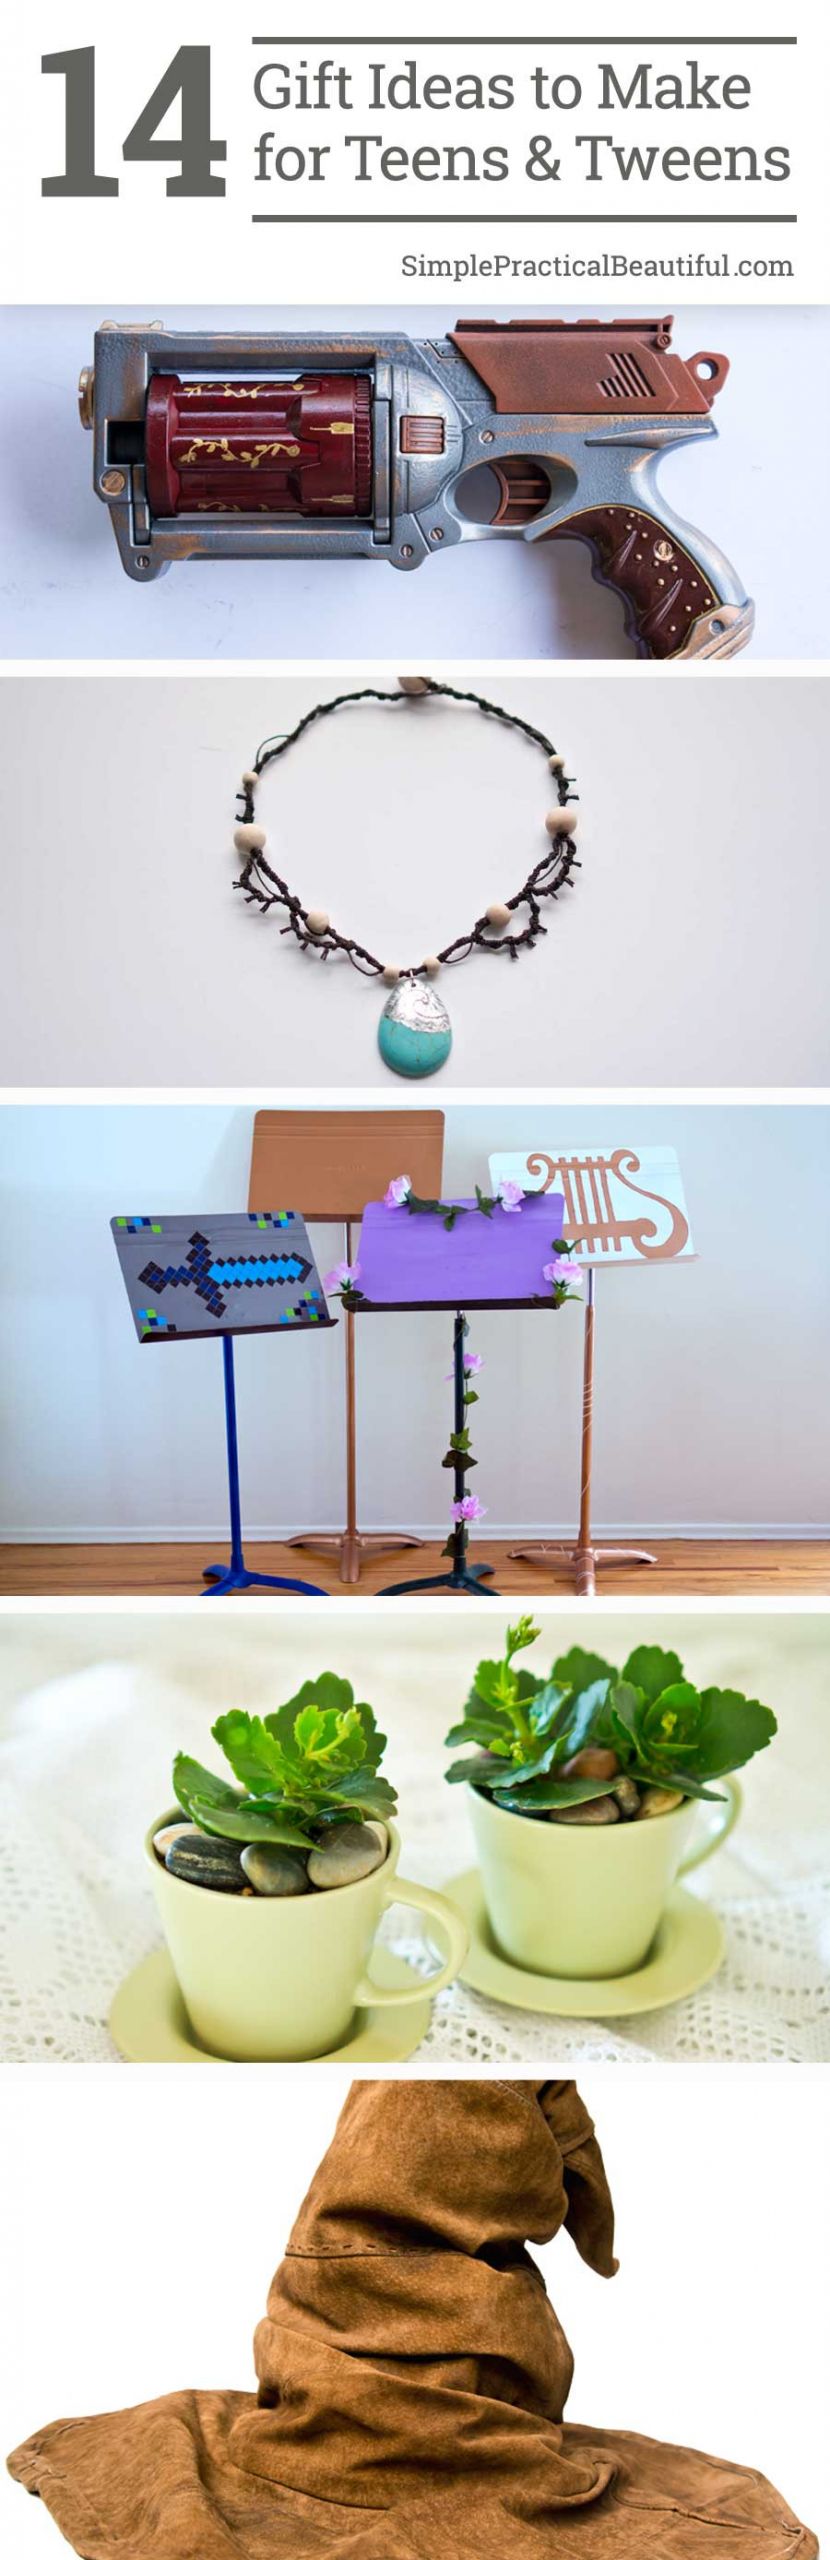 DIY Gifts For Tweens
 14 Gift Ideas to Make for Teens and Tweens Simple